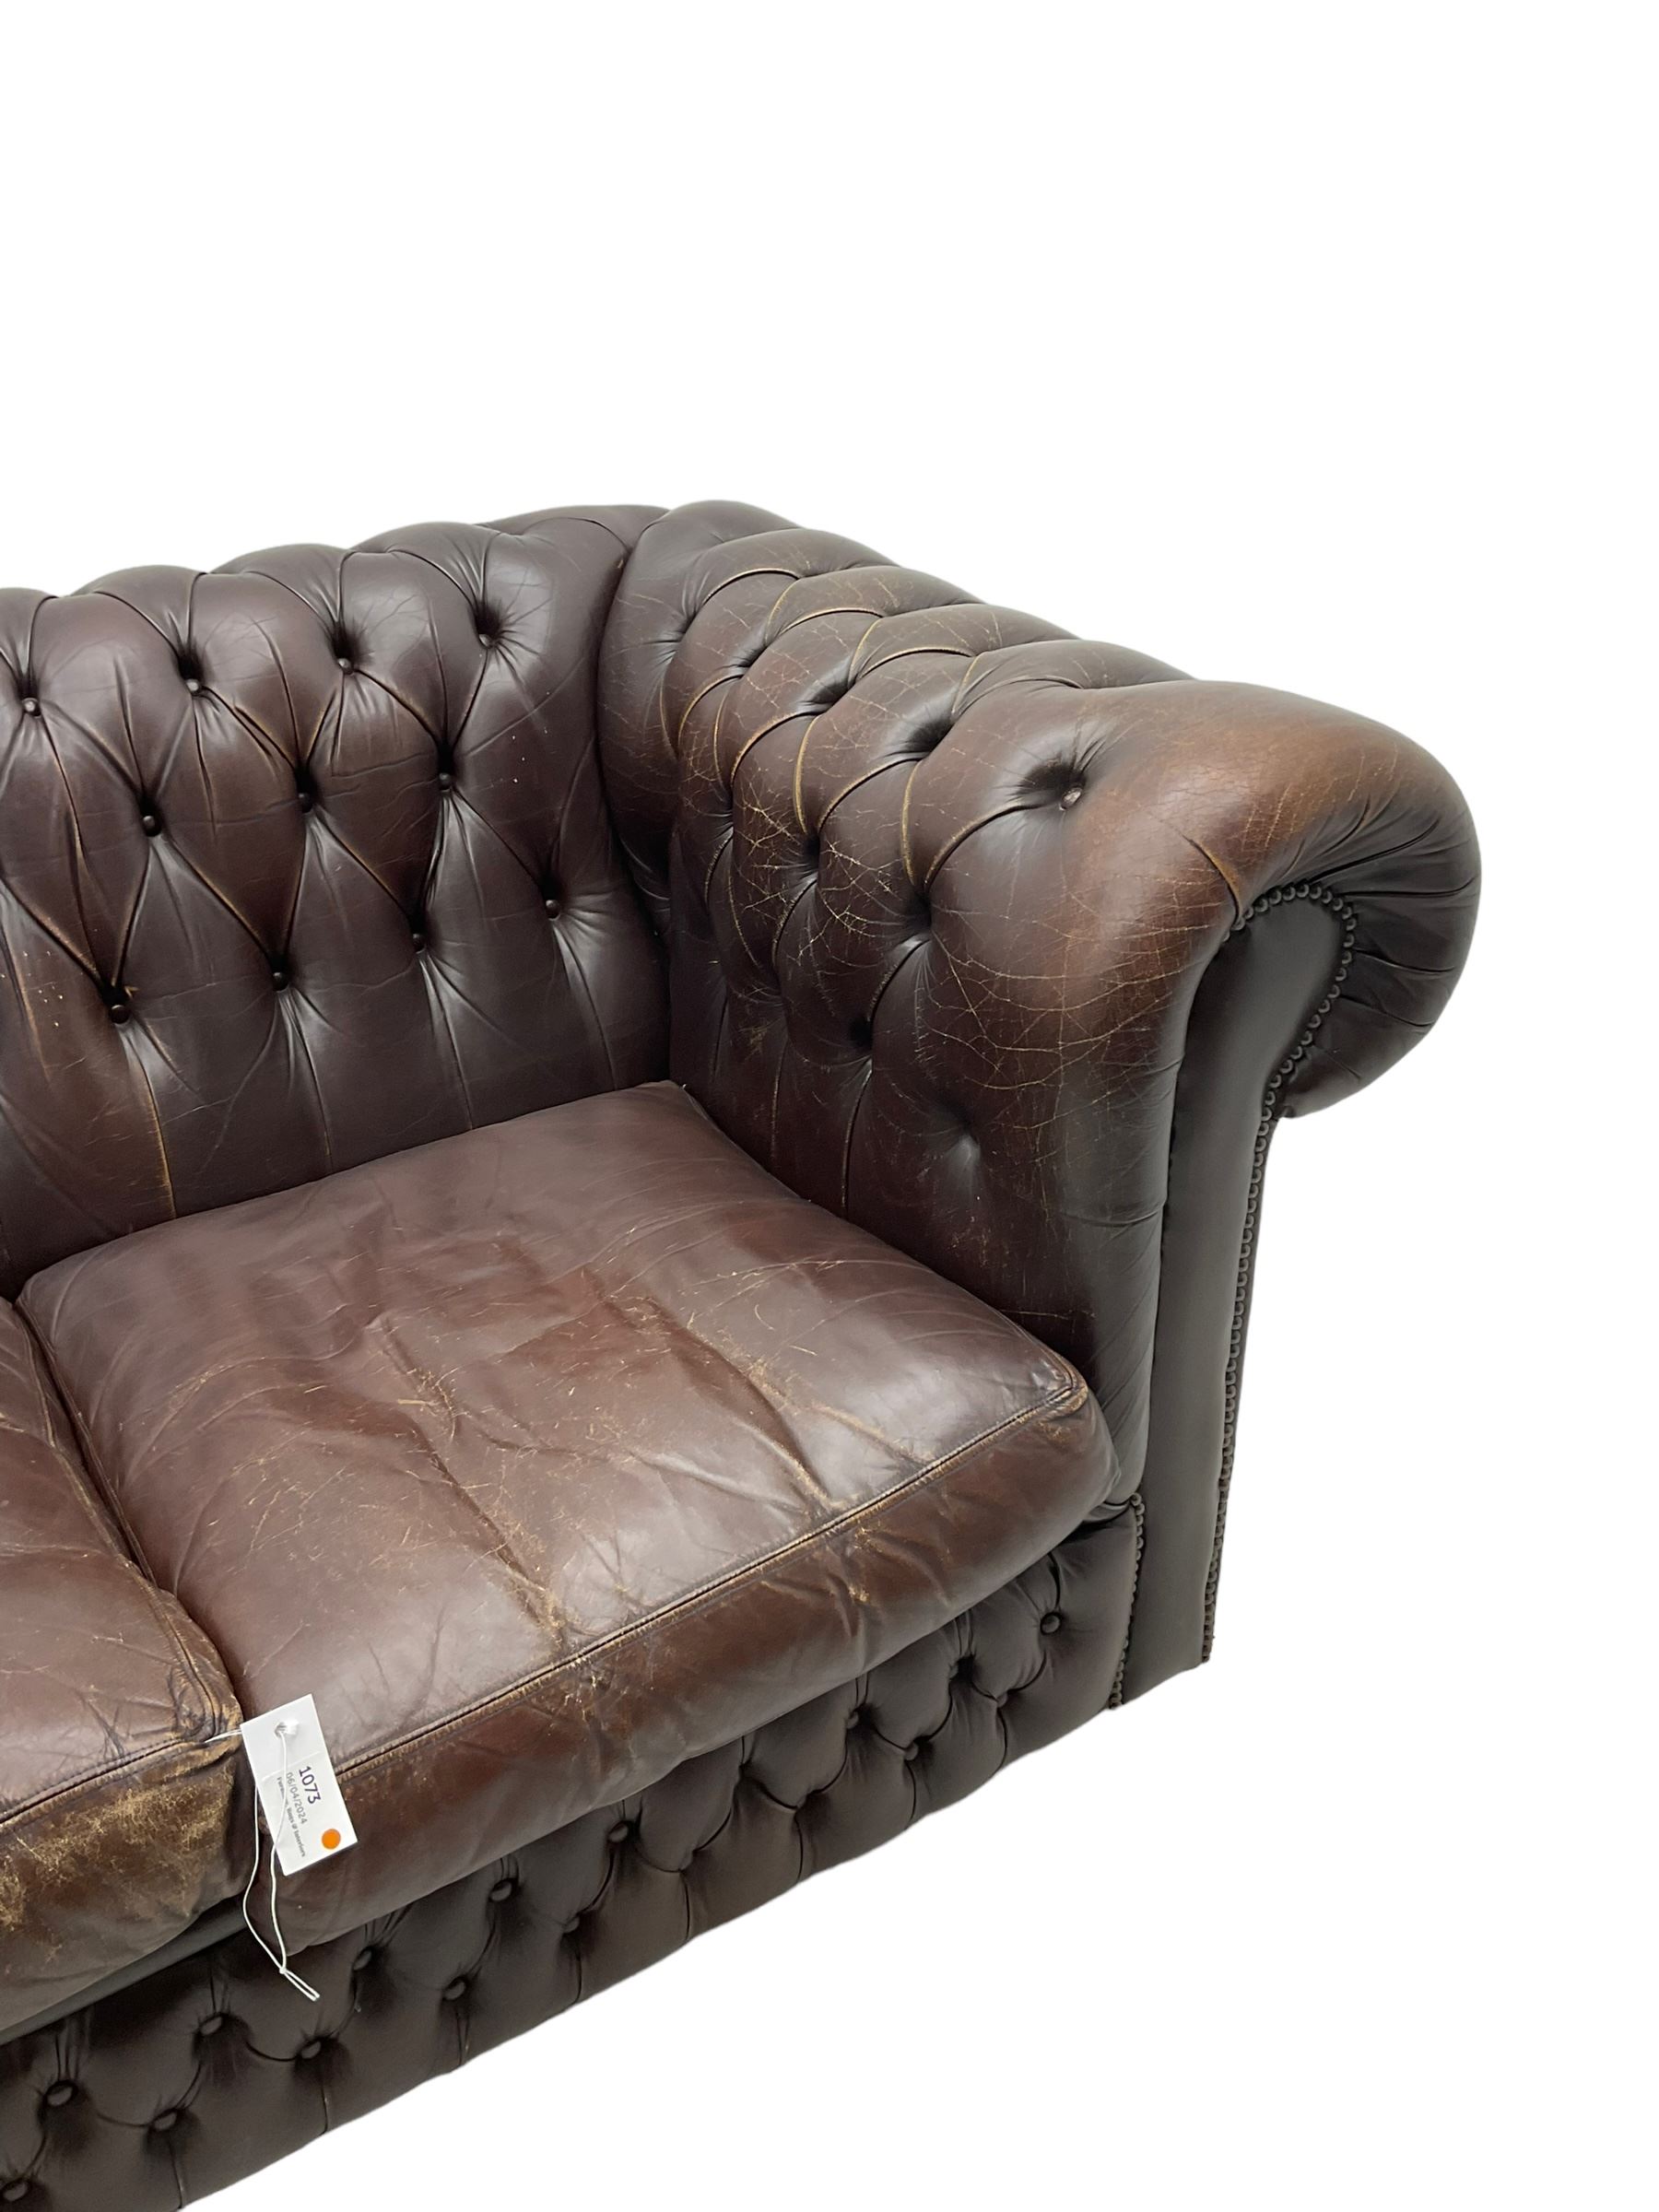 Three-seat Chesterfield sofa - Image 3 of 5